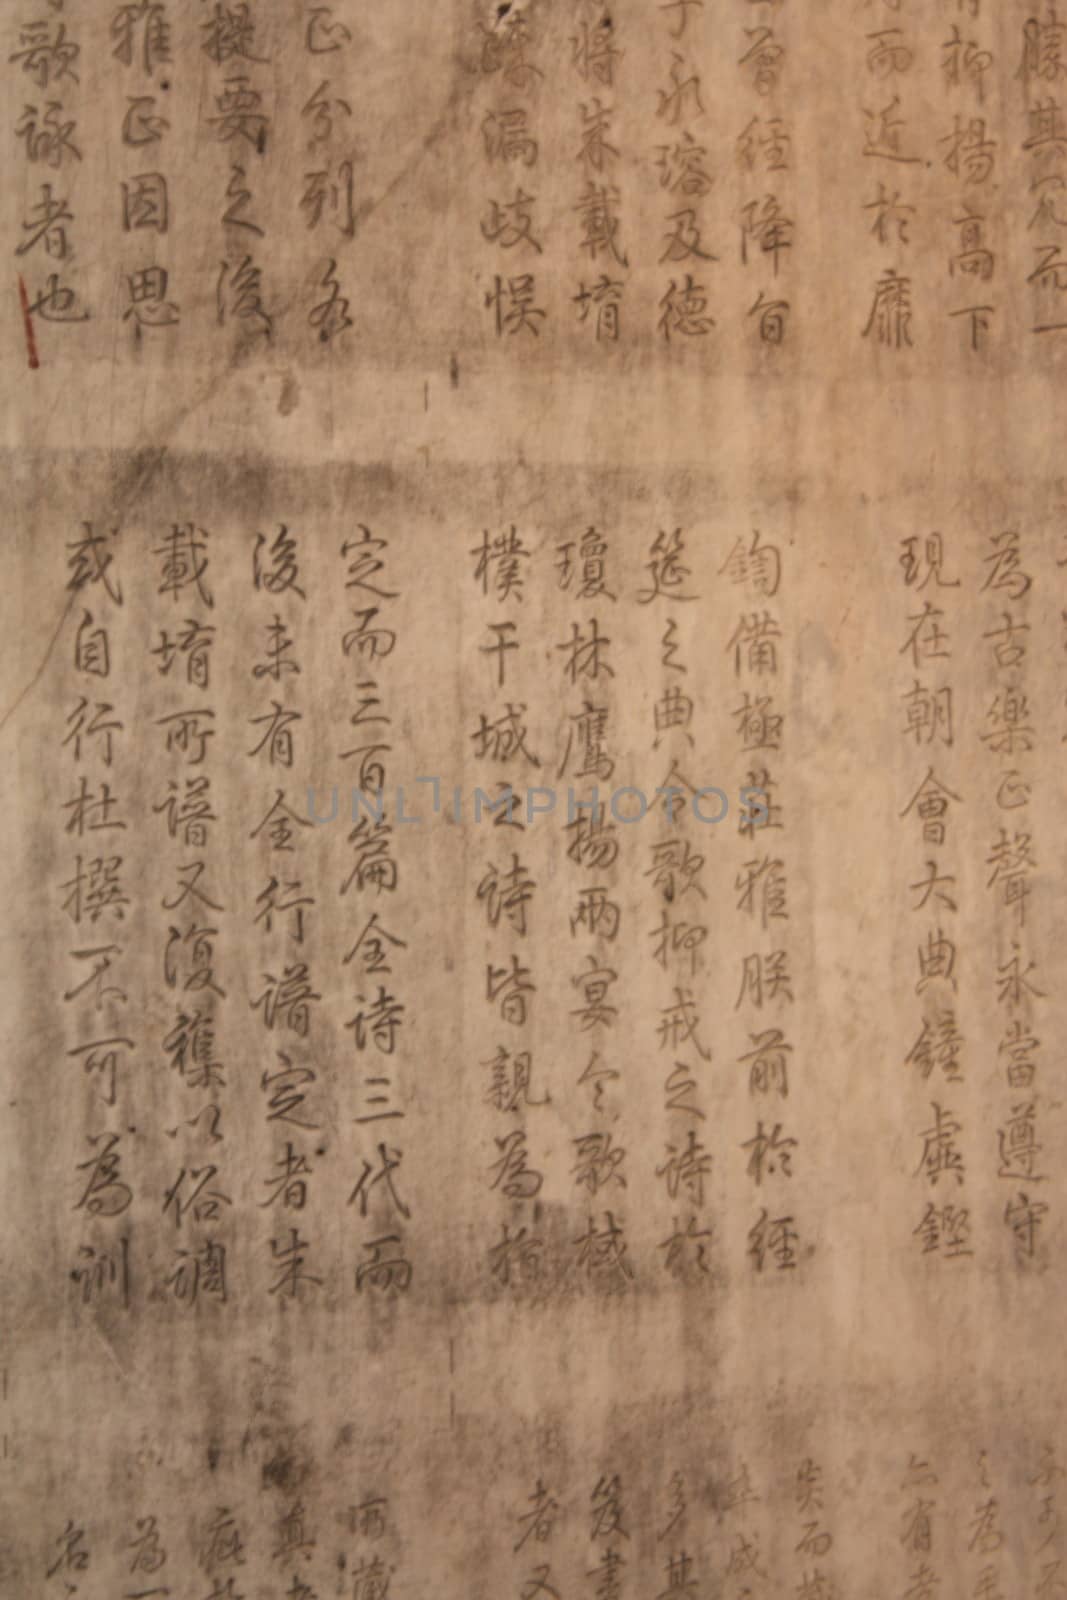 chinese character of the steles, photo taken in the confucius temple in beijing,china.